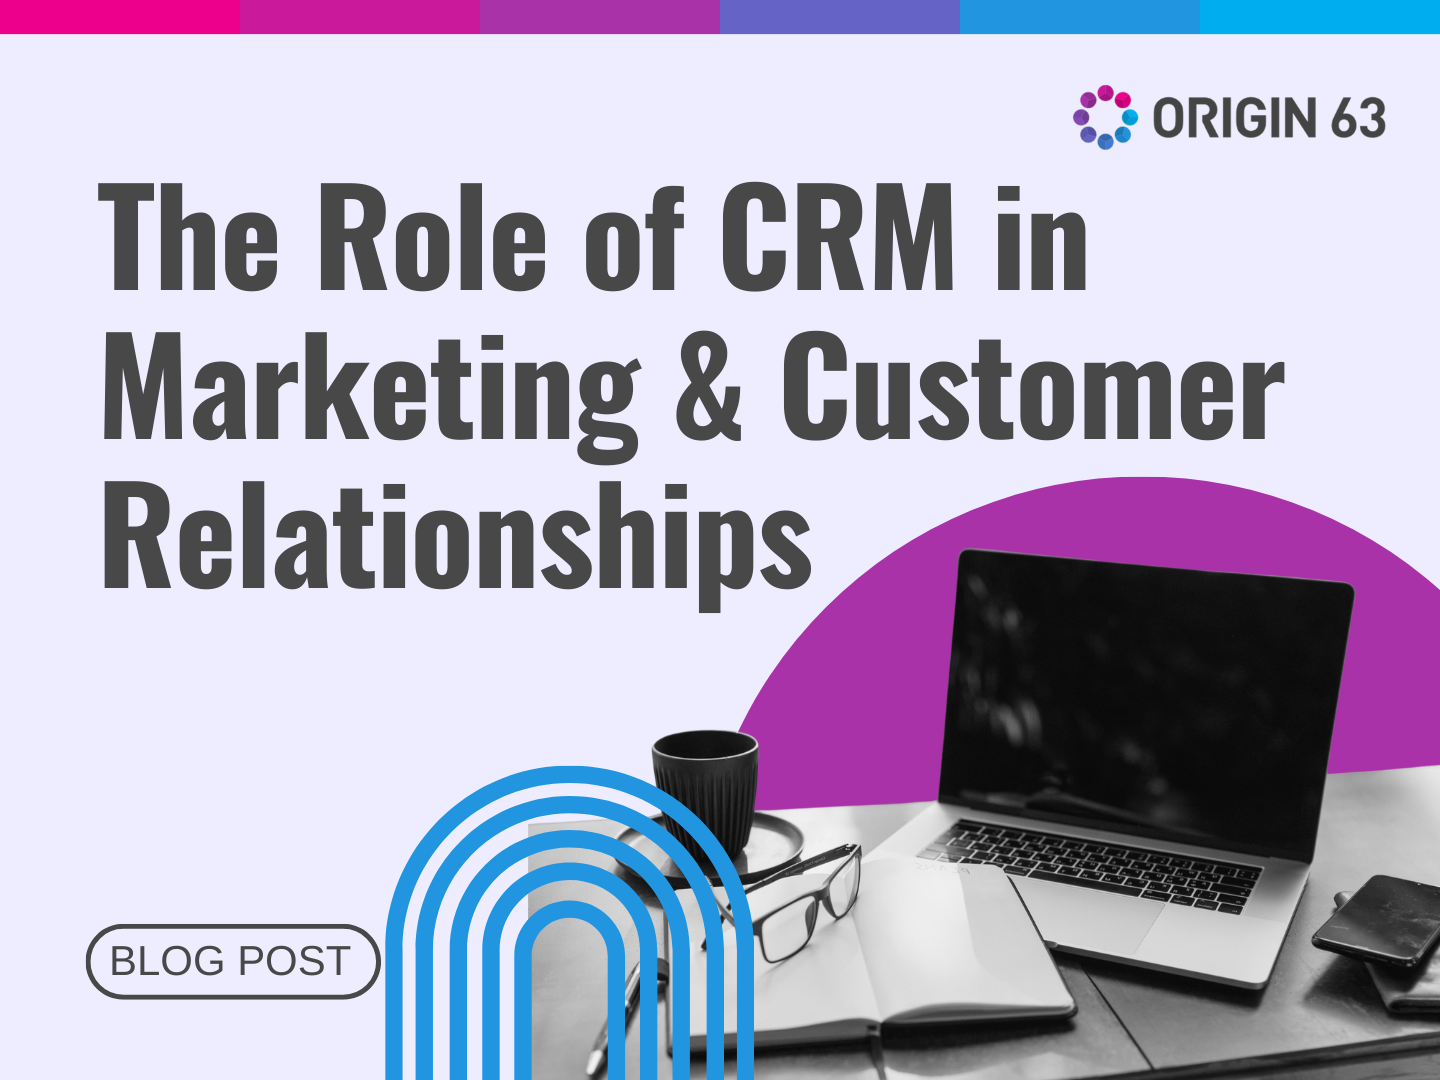 Understand customers deeply to cut through marketing clutter with unified CRM data and analytics.